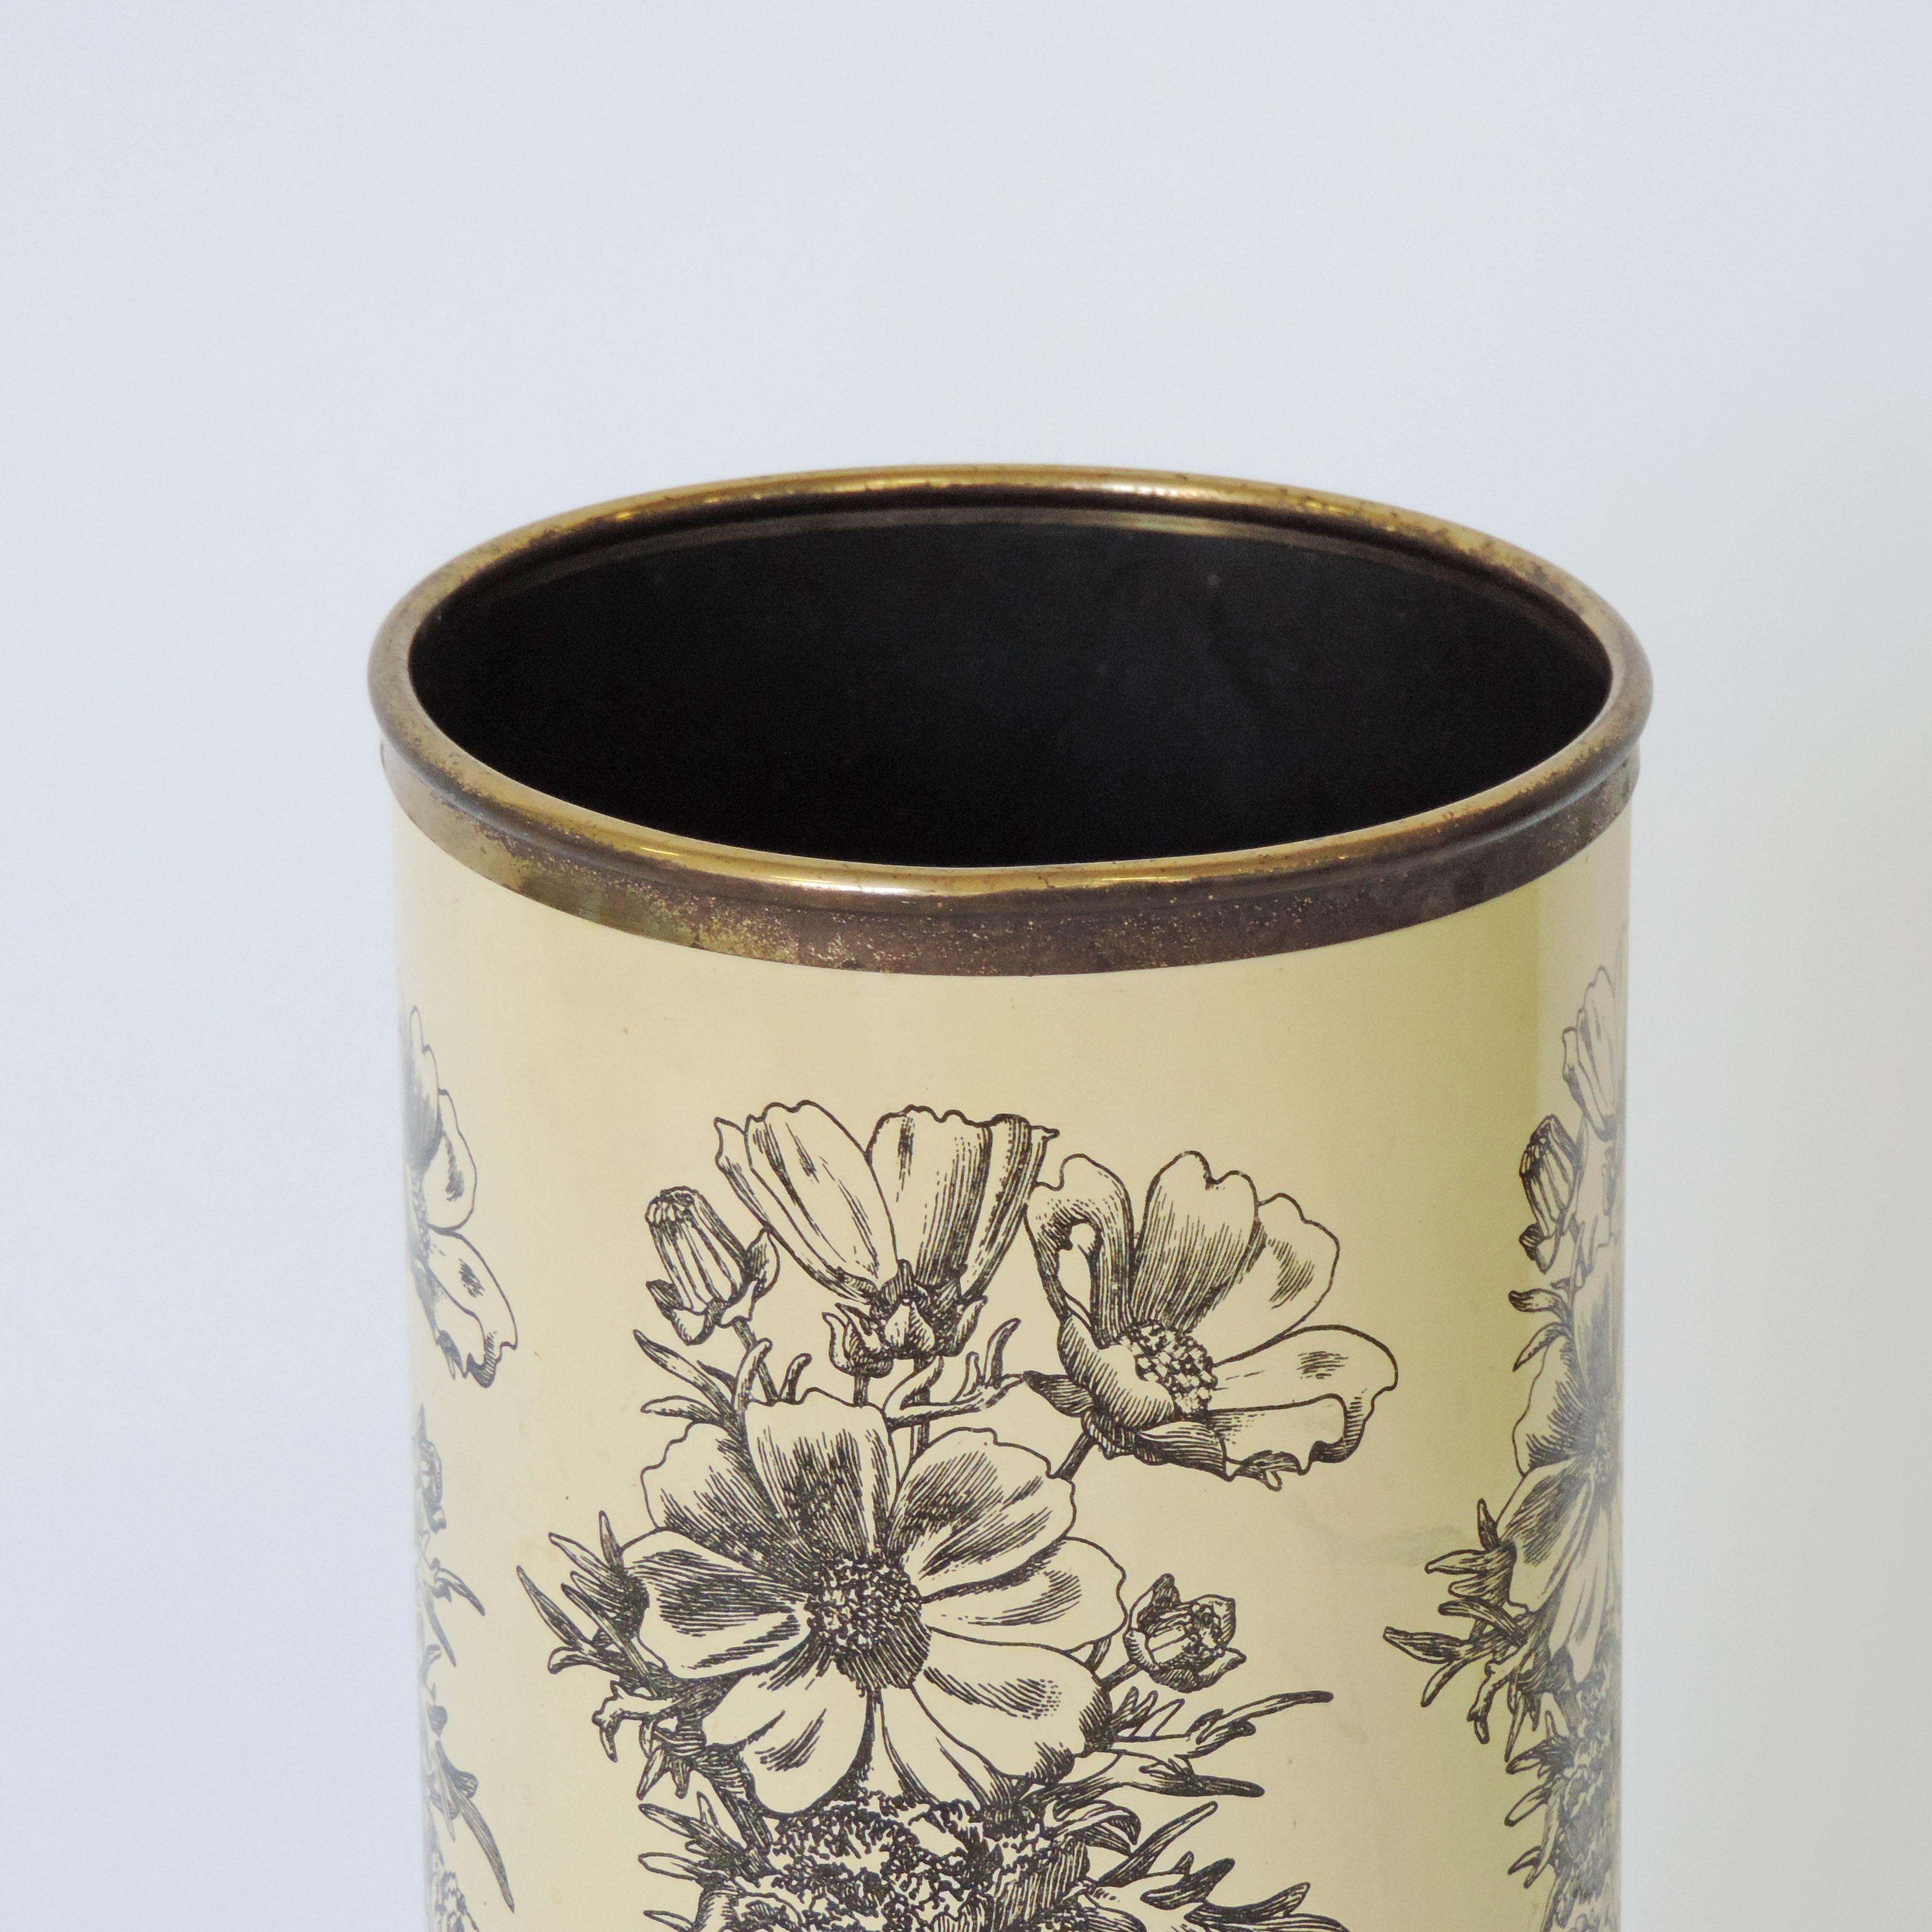 Piero Fornasetti early flowers umbrella stand, Italy 1950s.